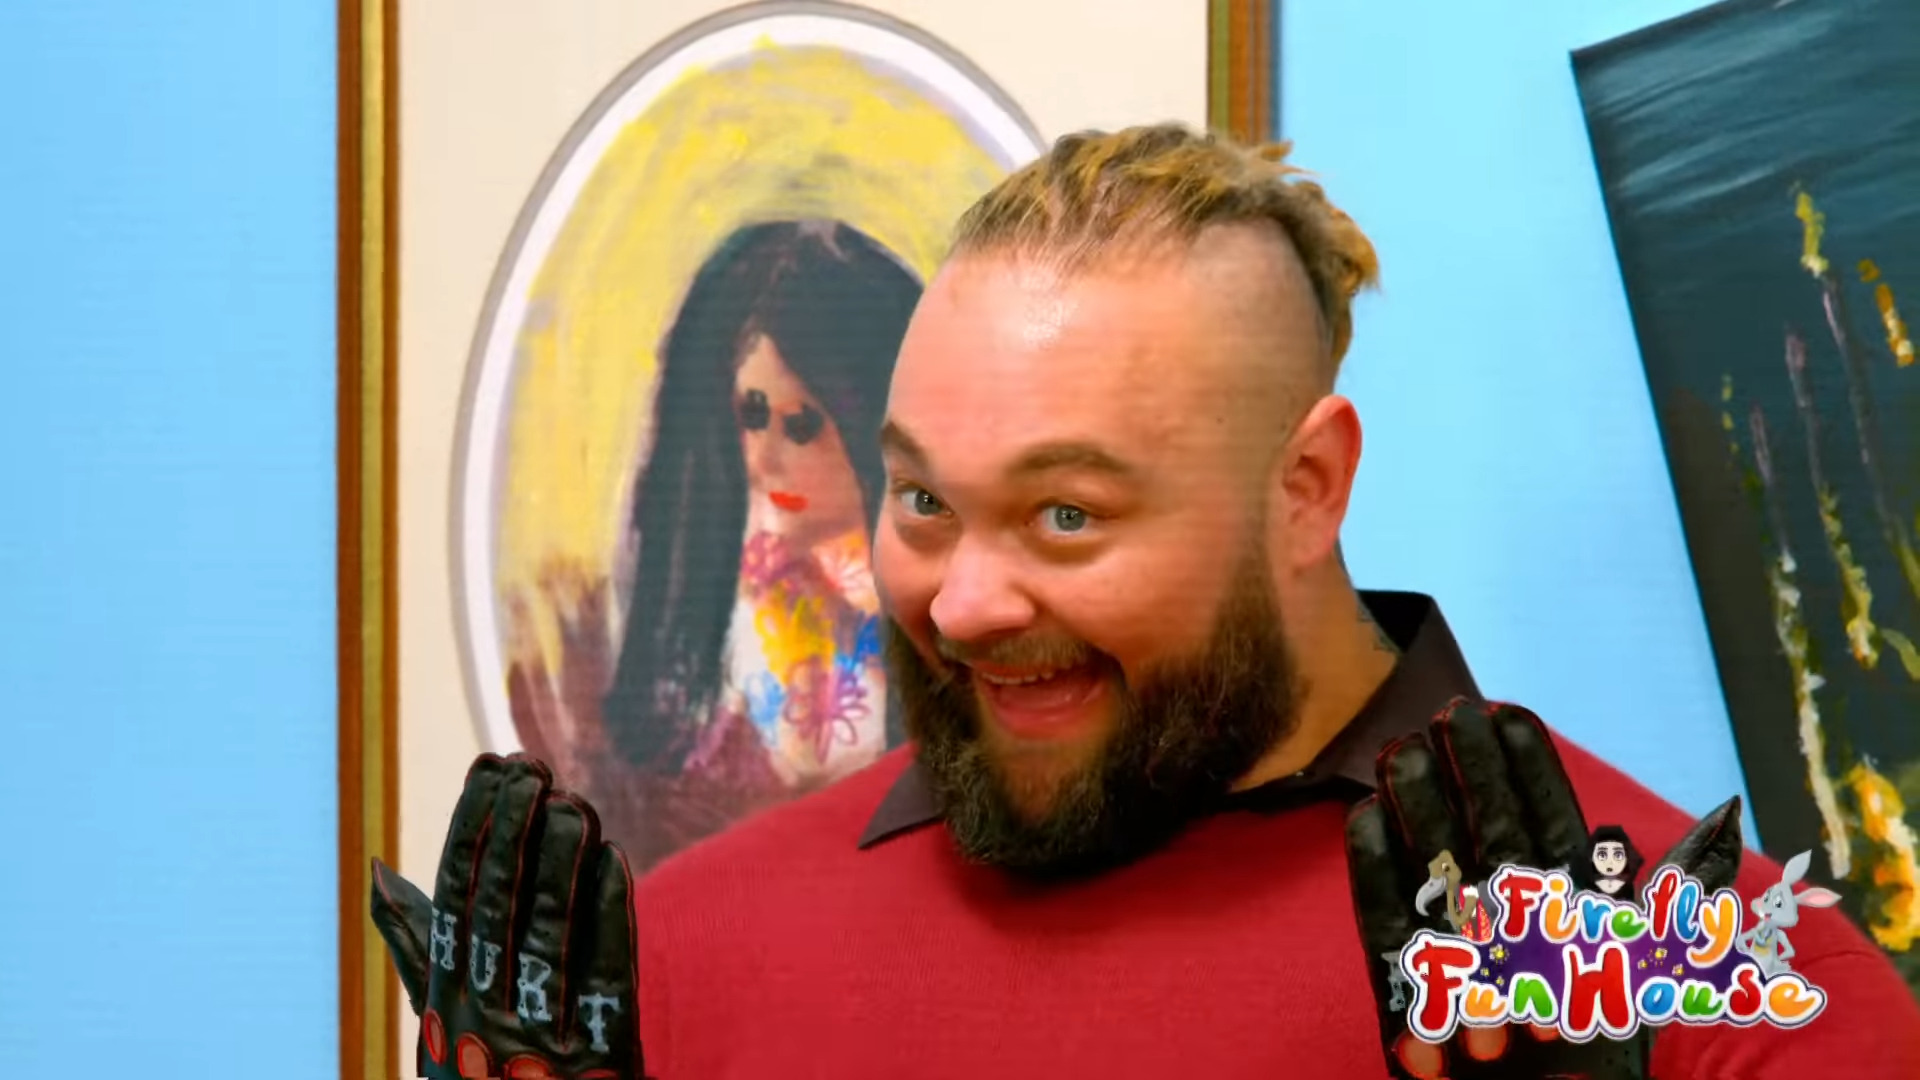 Bray Wyatt welcomes viewers to the latest episode of Firefly Funhouse